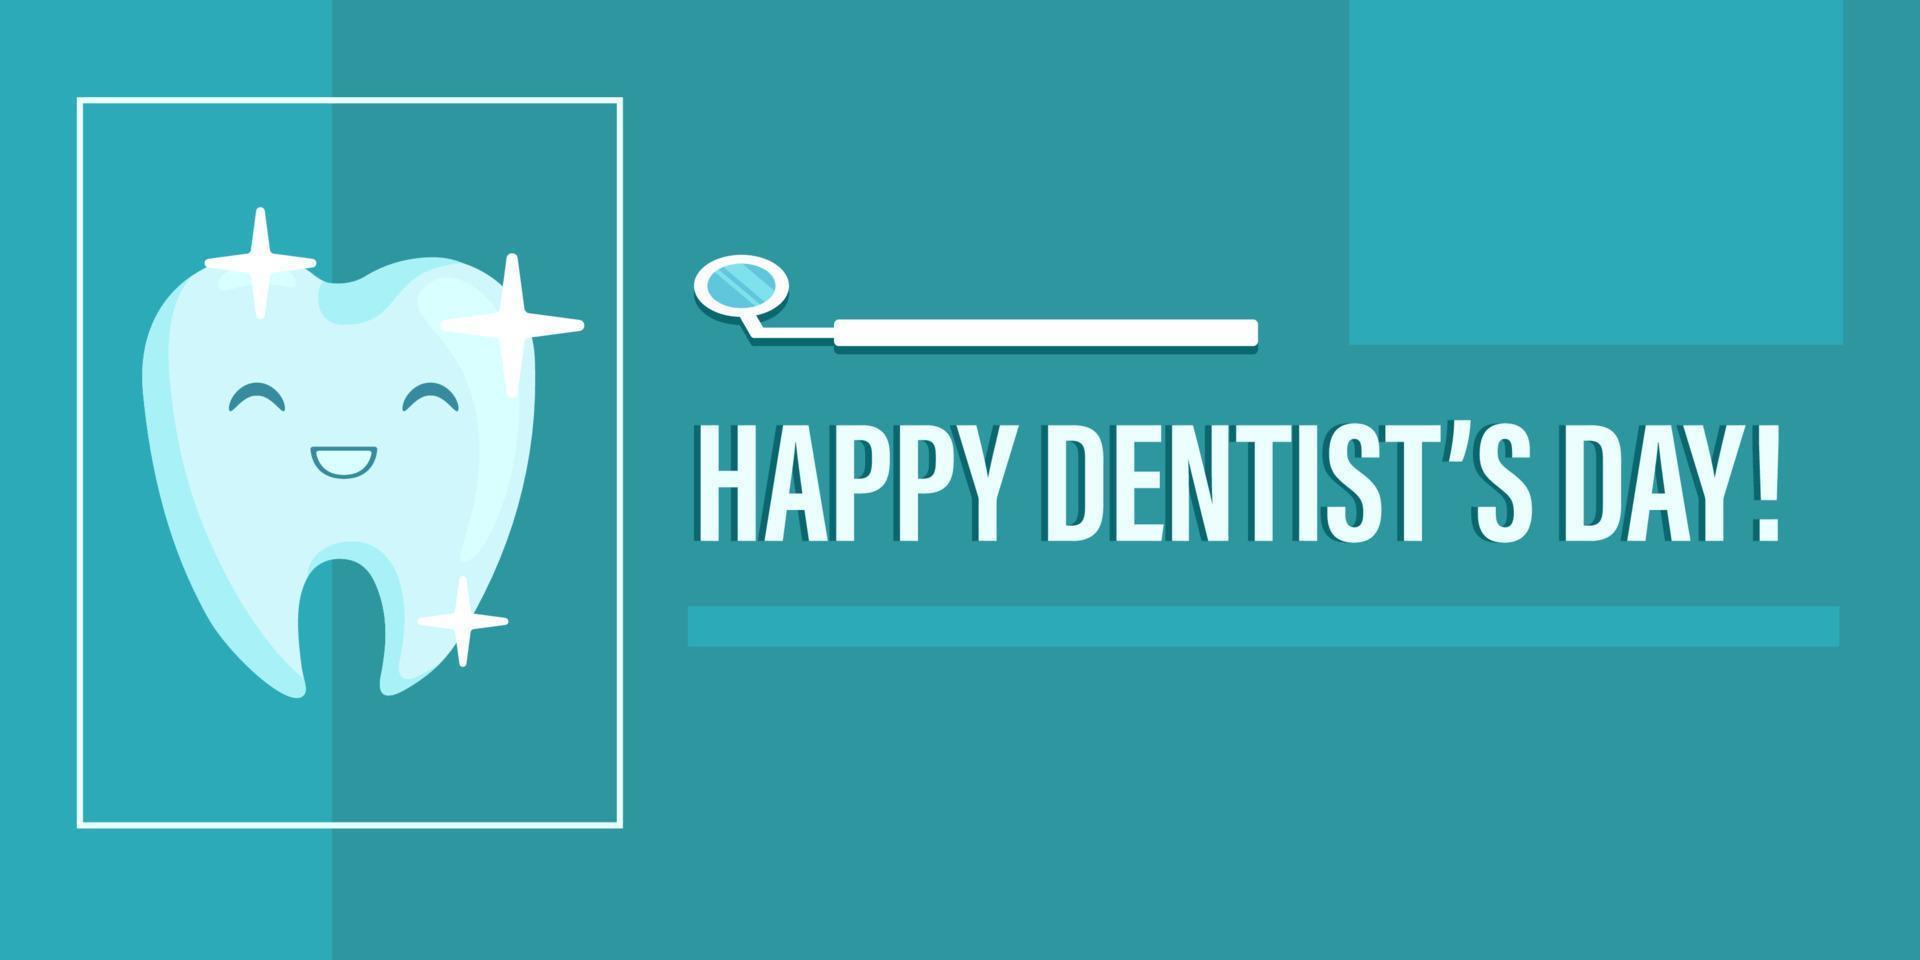 Dantist's Day invitation, vector banner, dentistry holiday poster with glowing tooth and medical tool for dentists.